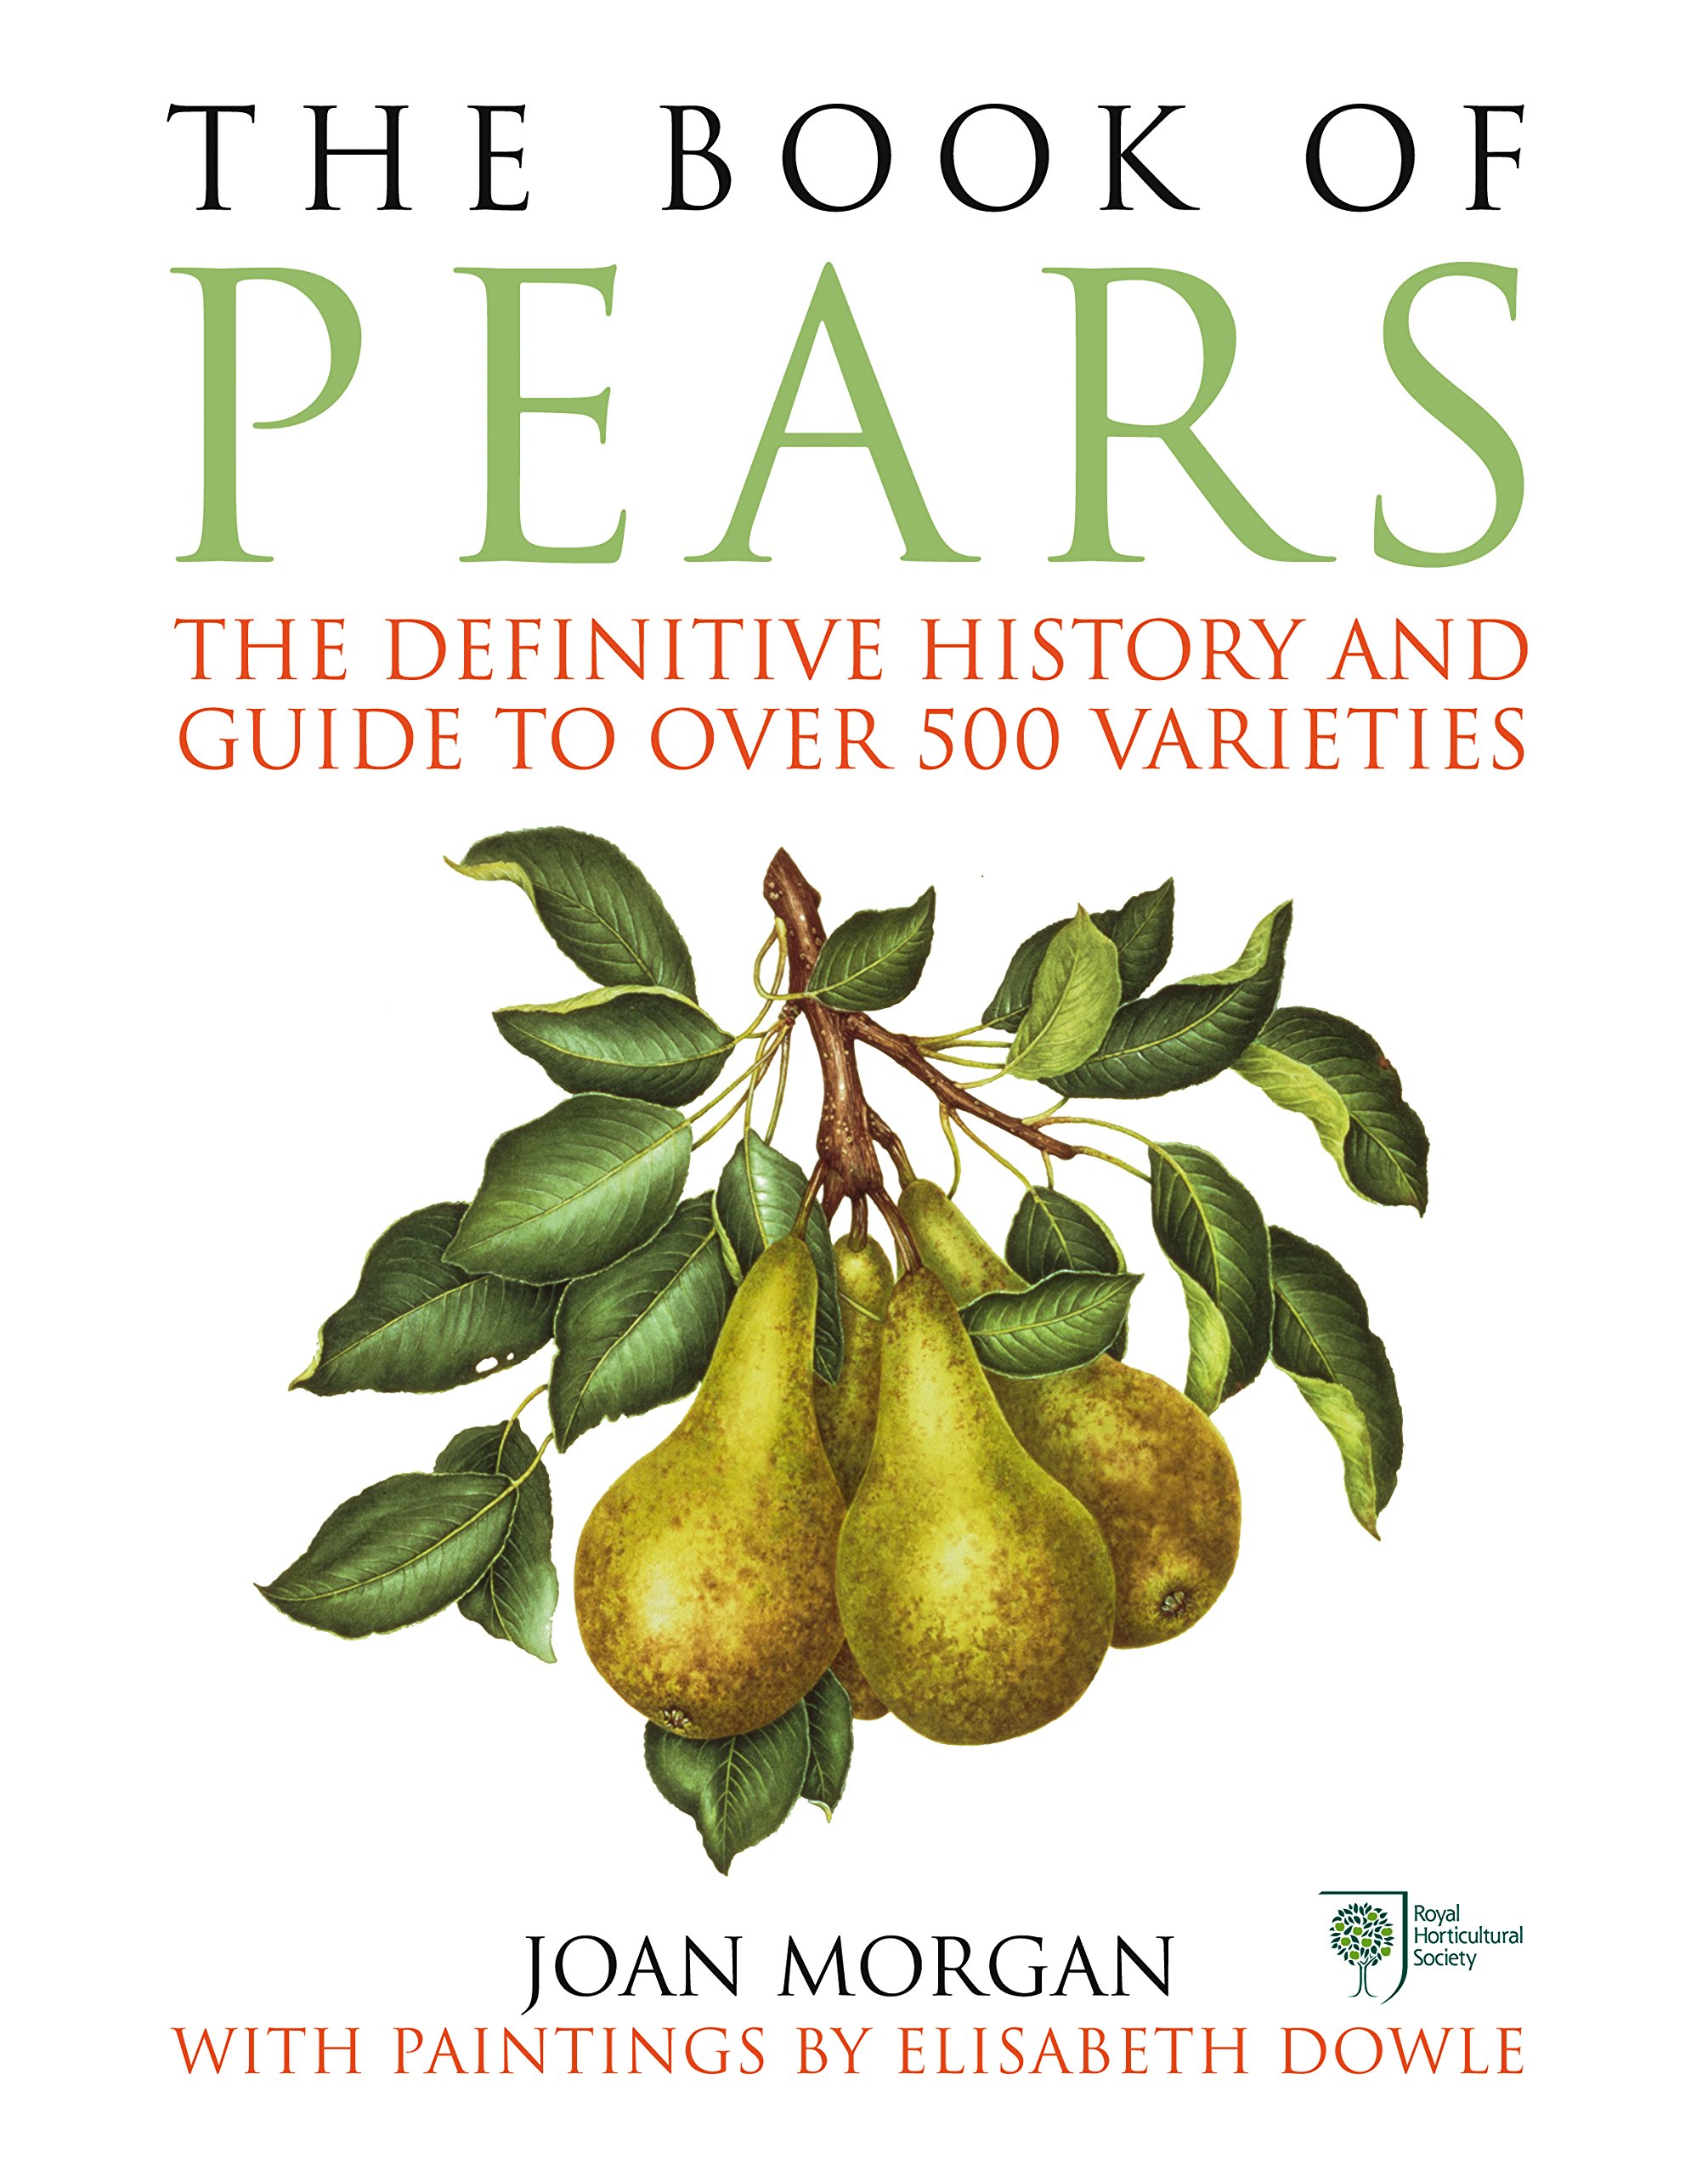 The Book of Pears: The Definitive History and Guide to Over 500 Varieties by Joan Morgan.